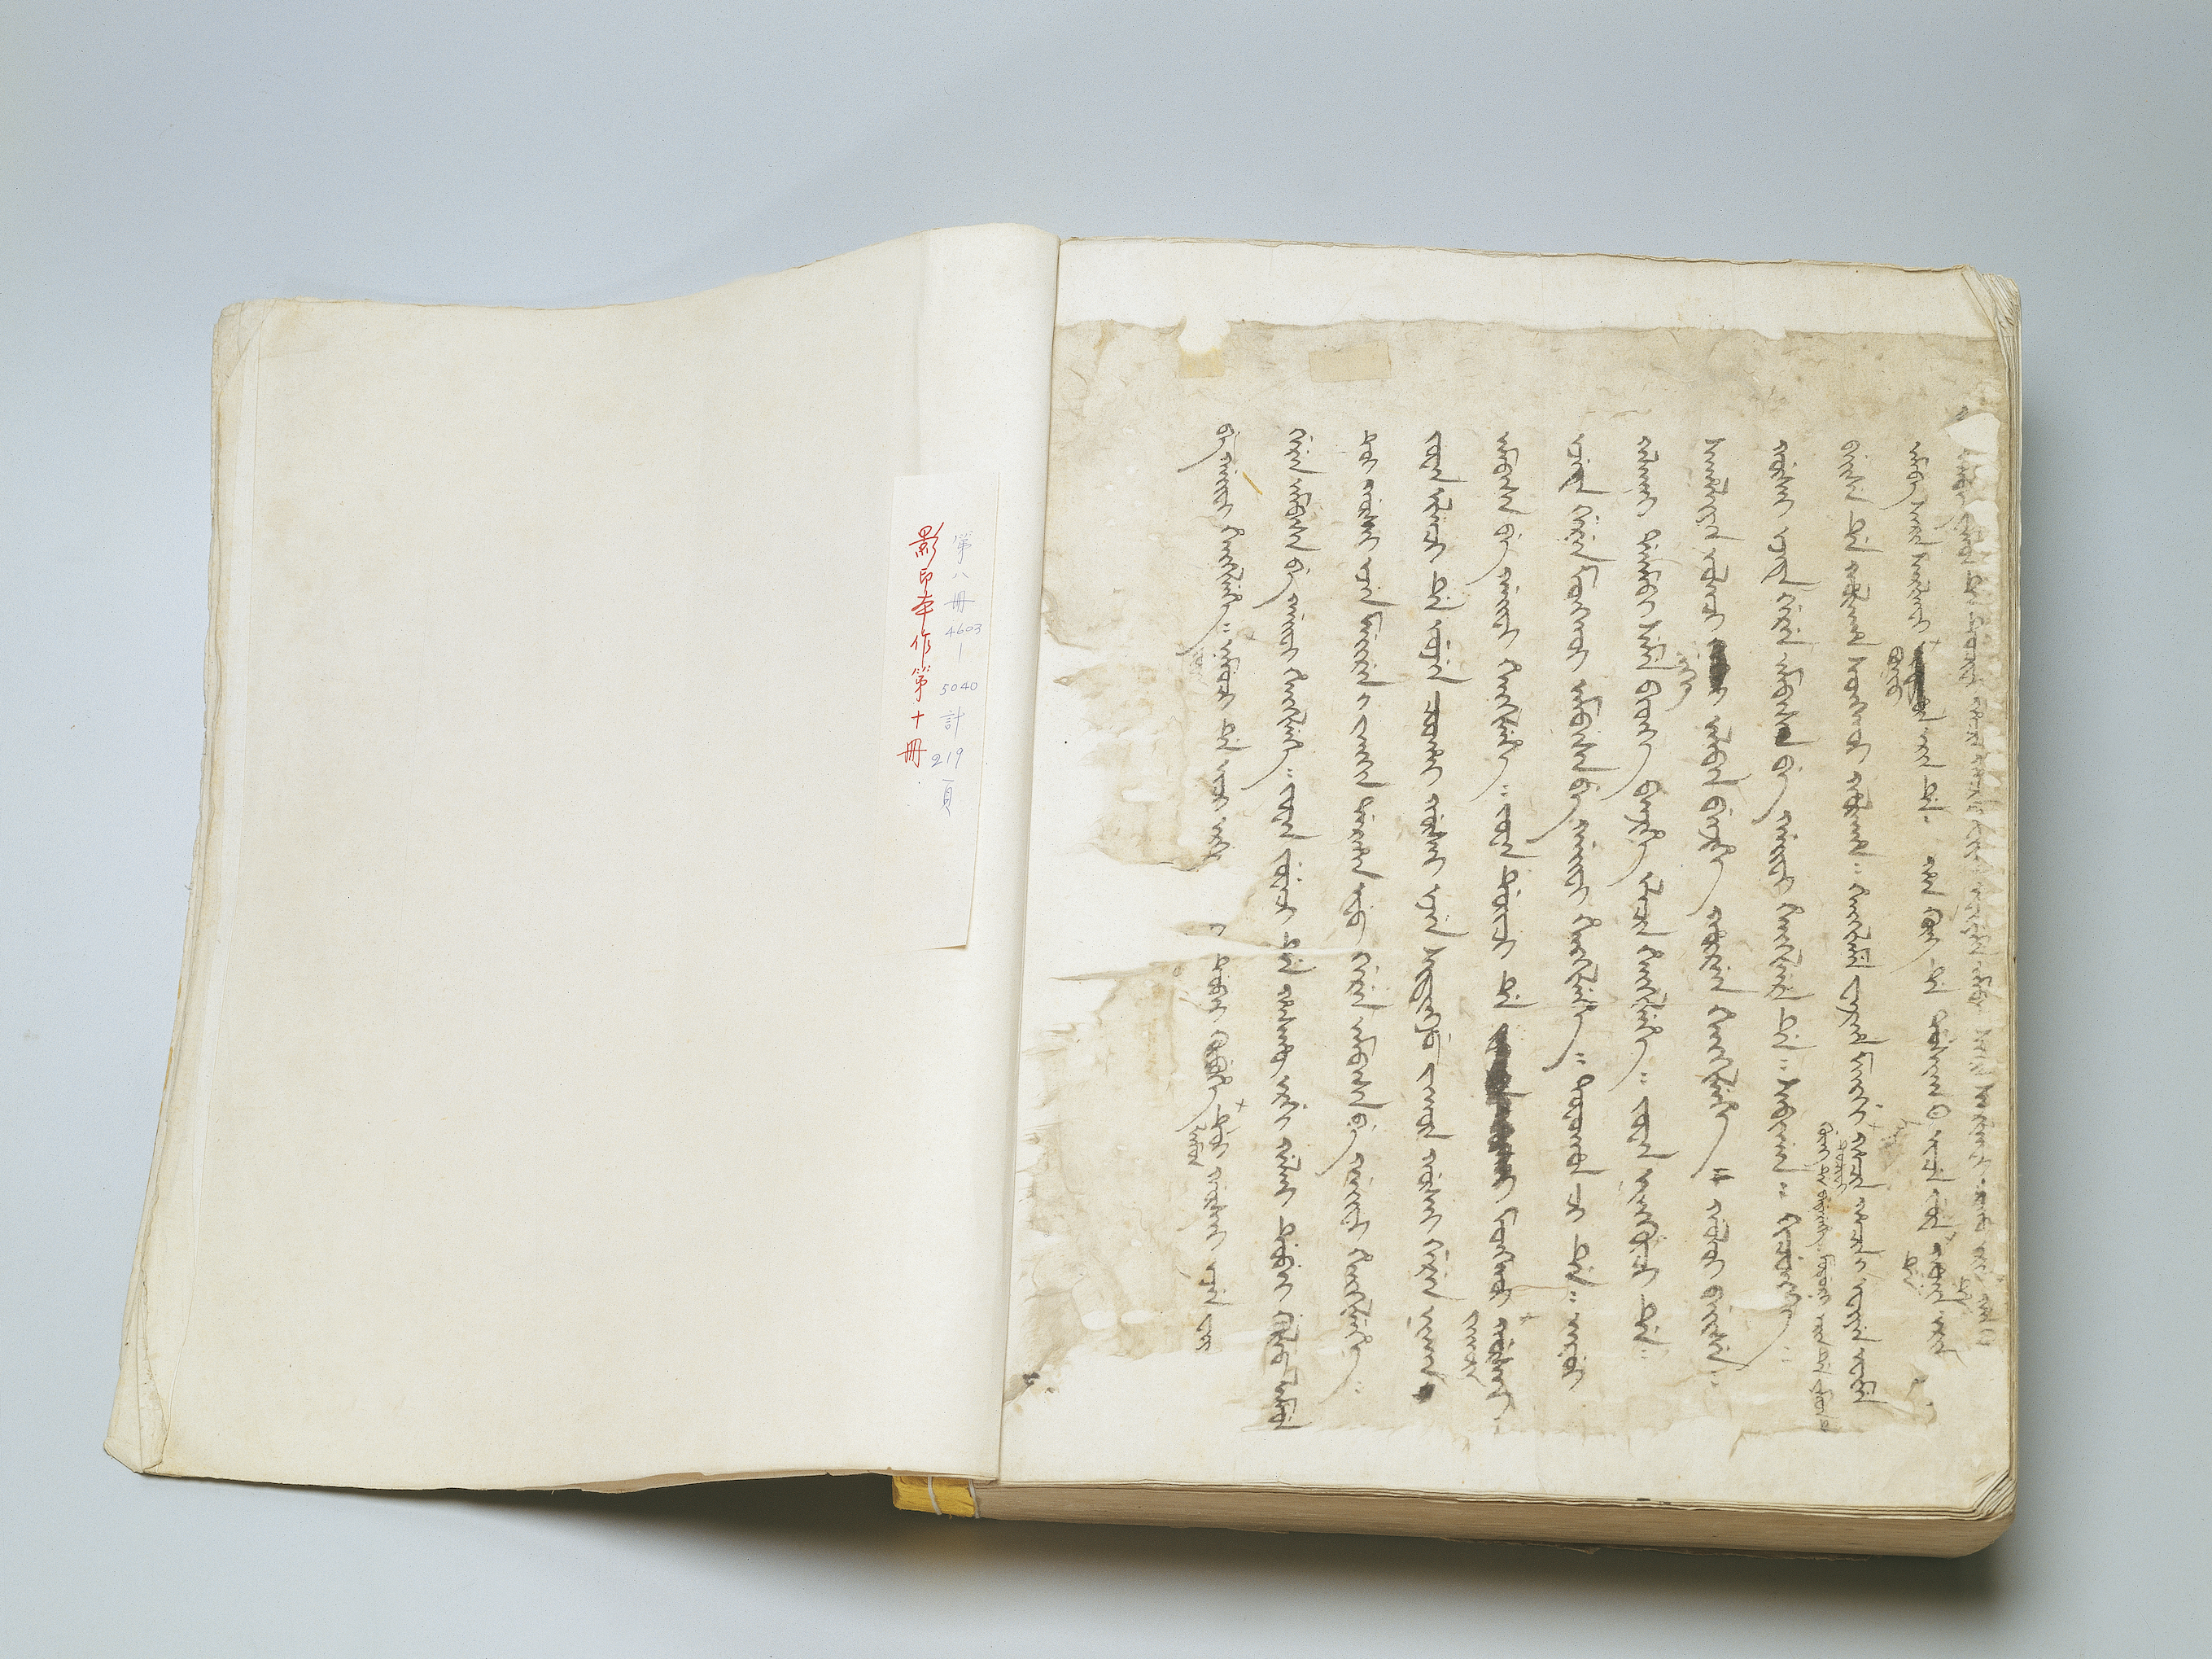 Documents in National Palace Museum, Qing dynasty (1644-1911)